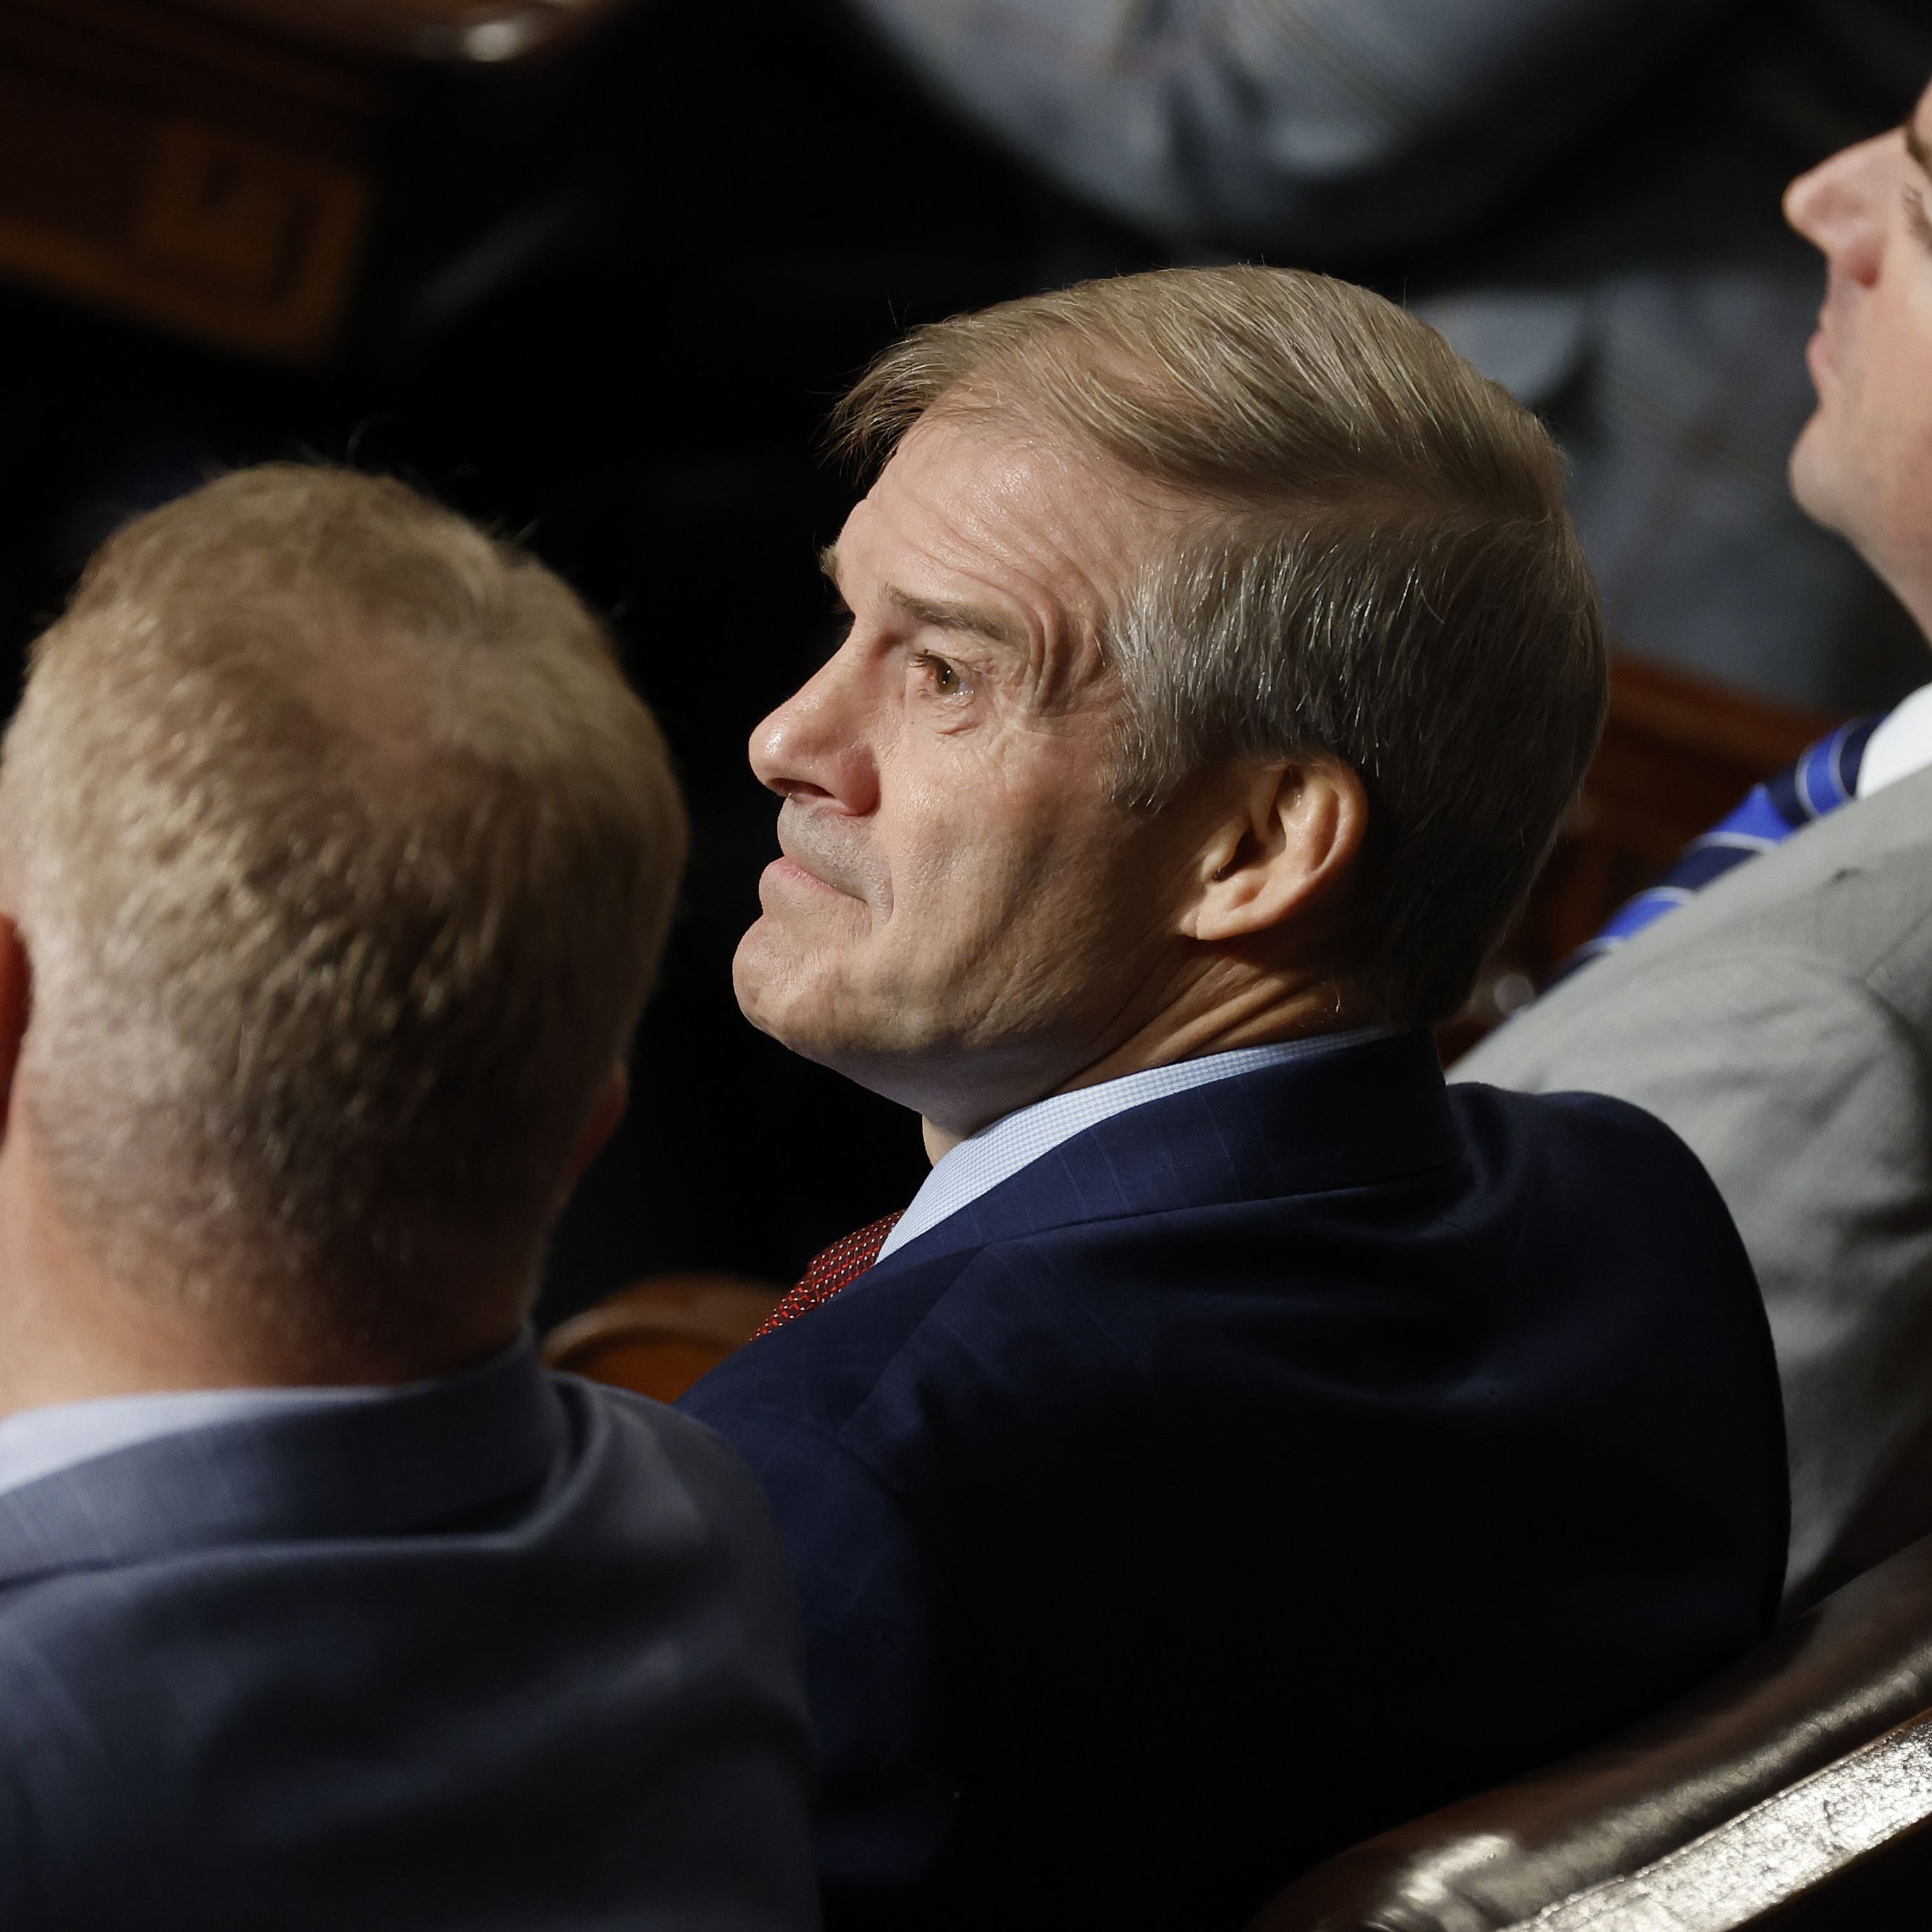 Jim Jordan Is About As Done As a Hunk of Brisket